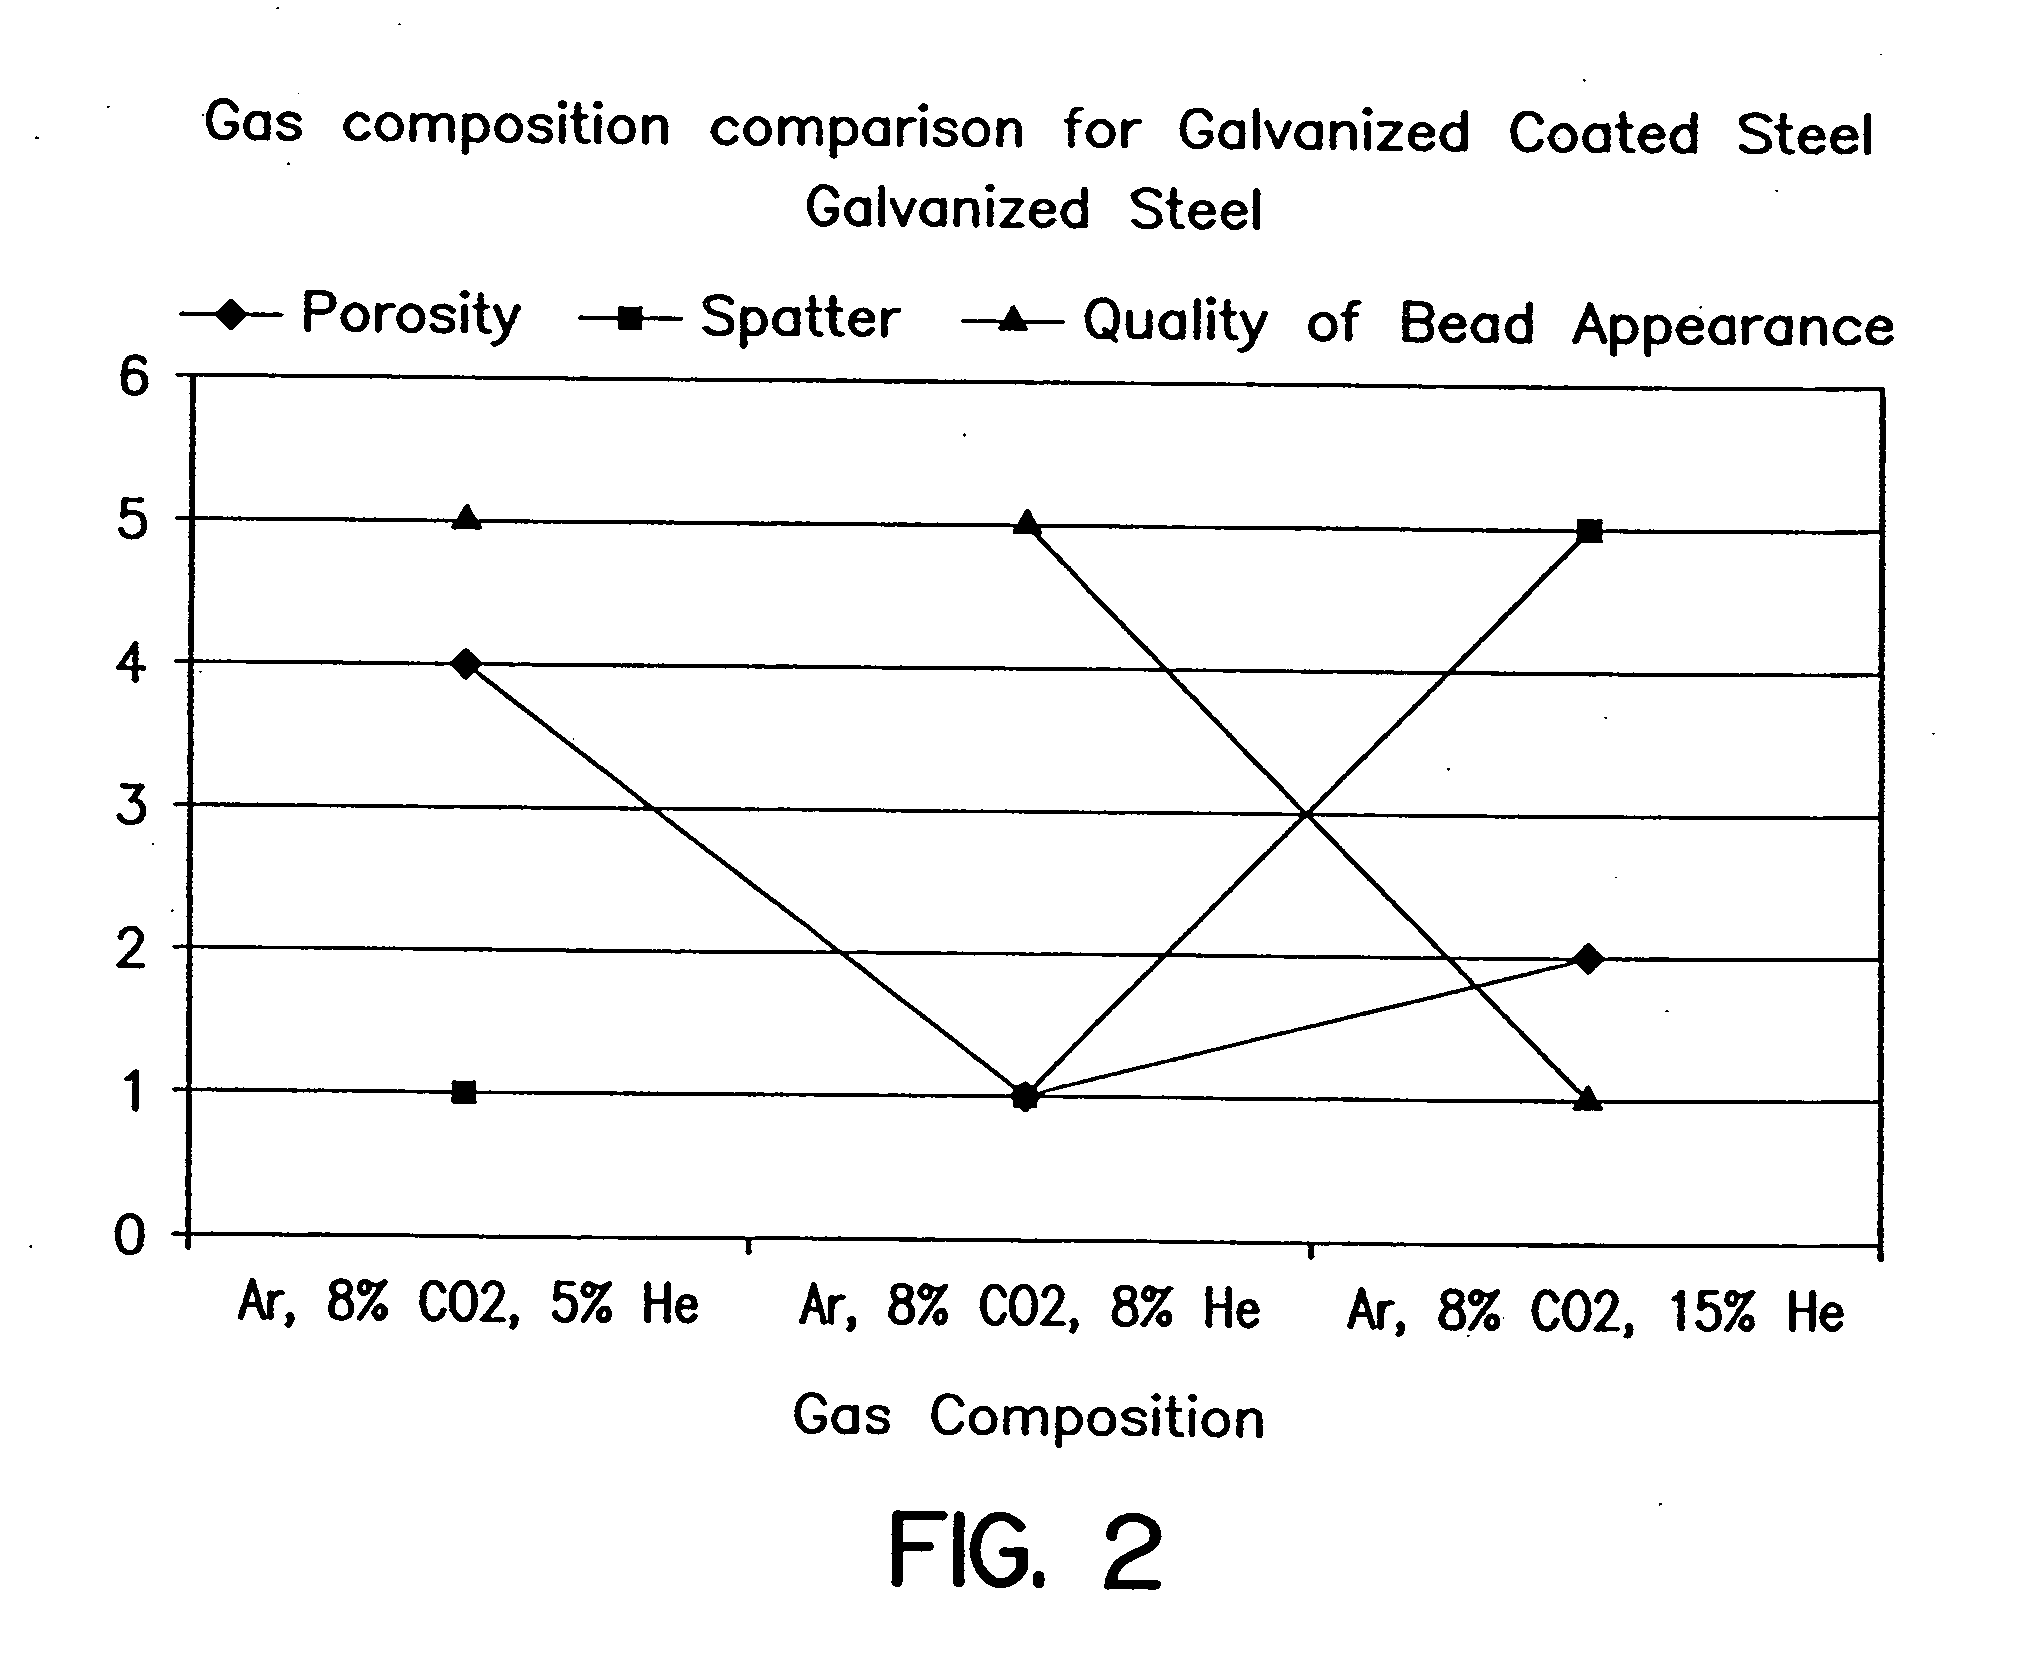 Shielding gas mixture for gas metal arc welding of coated steels